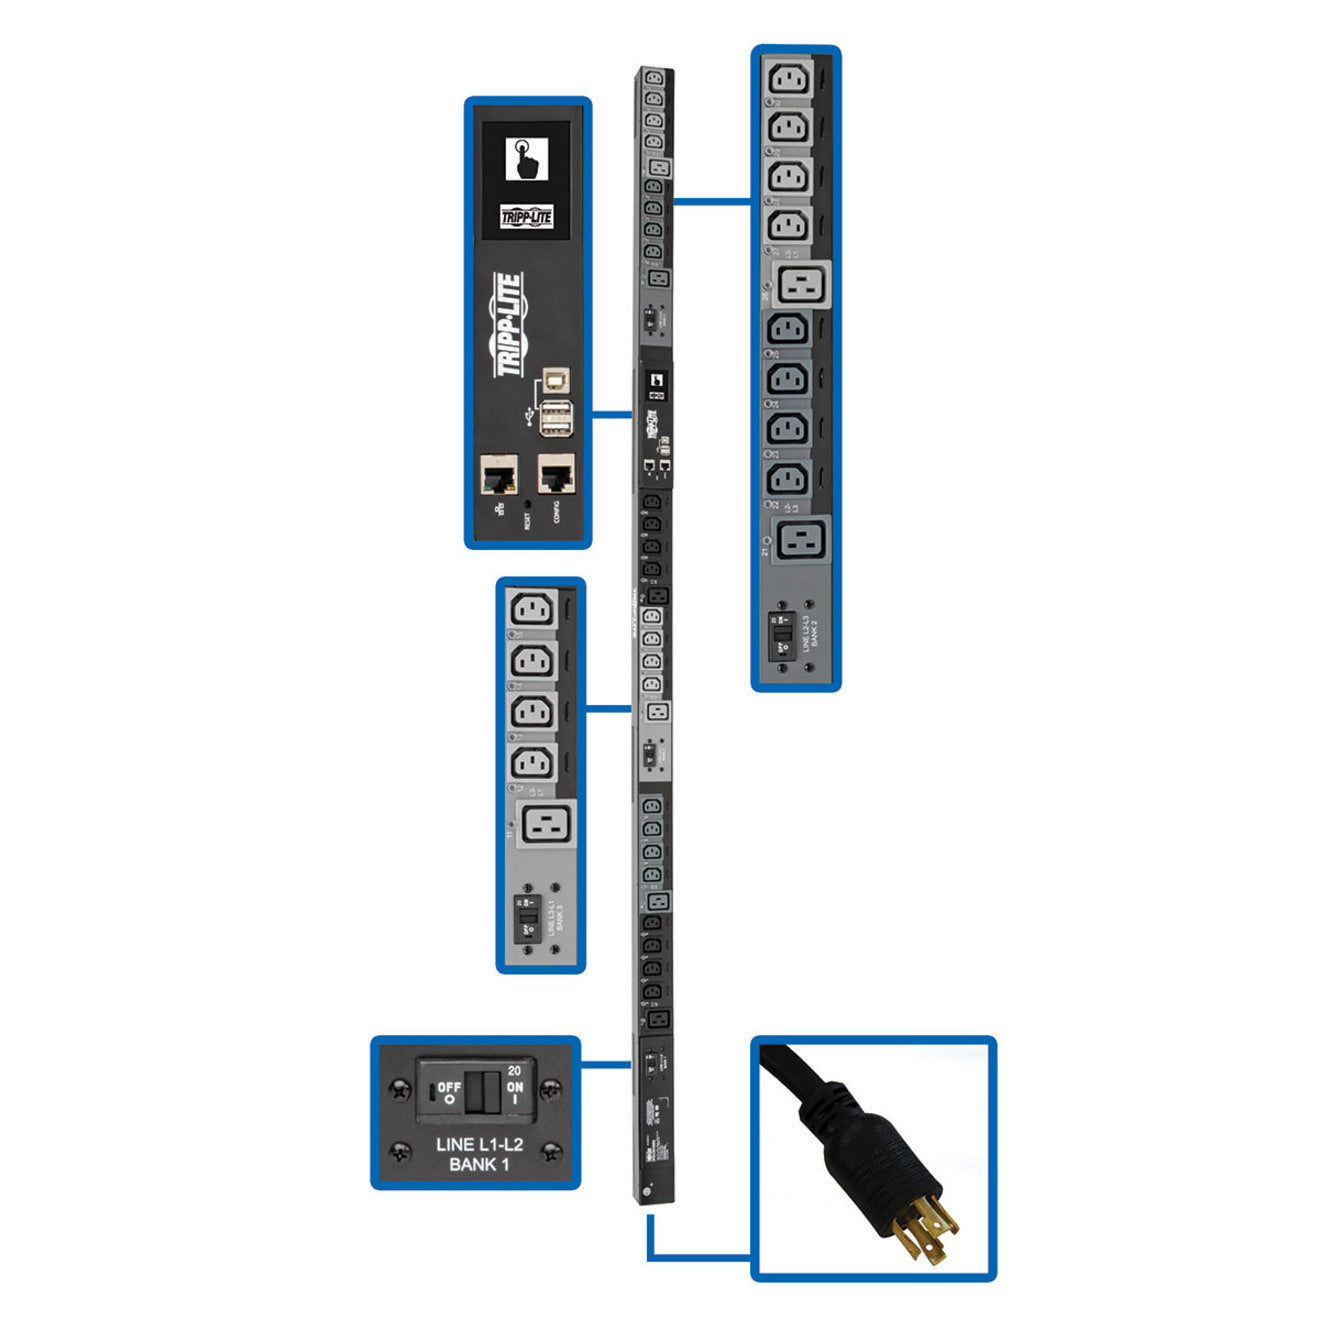 Tripp Lite PDU3EVSR6L2130 30-Outlet PDU, 10 kW Power Rating, Three Phase, Switched, Overload Protection